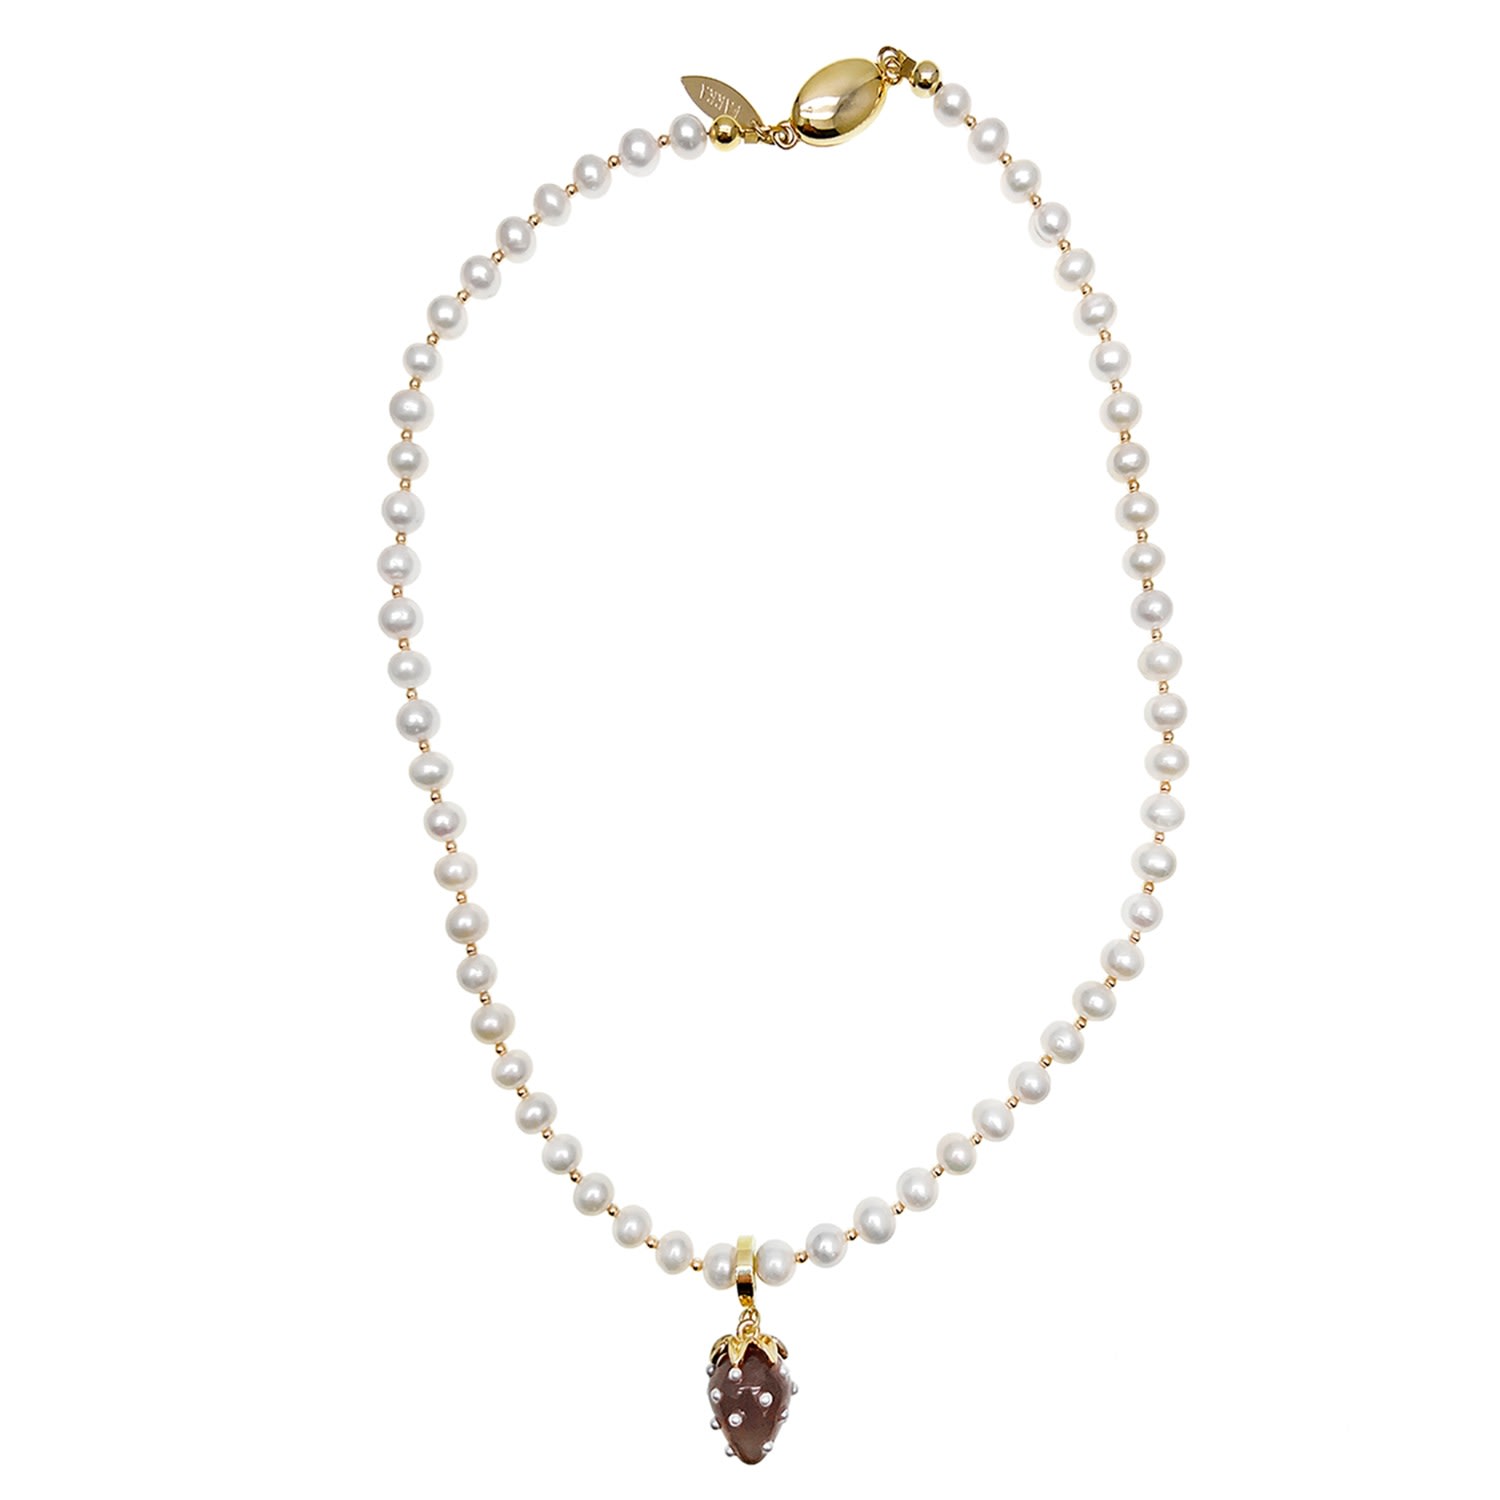 Women’s White Freshwater Pearls With Removable Gray Strawberry Pendant Necklace Farra